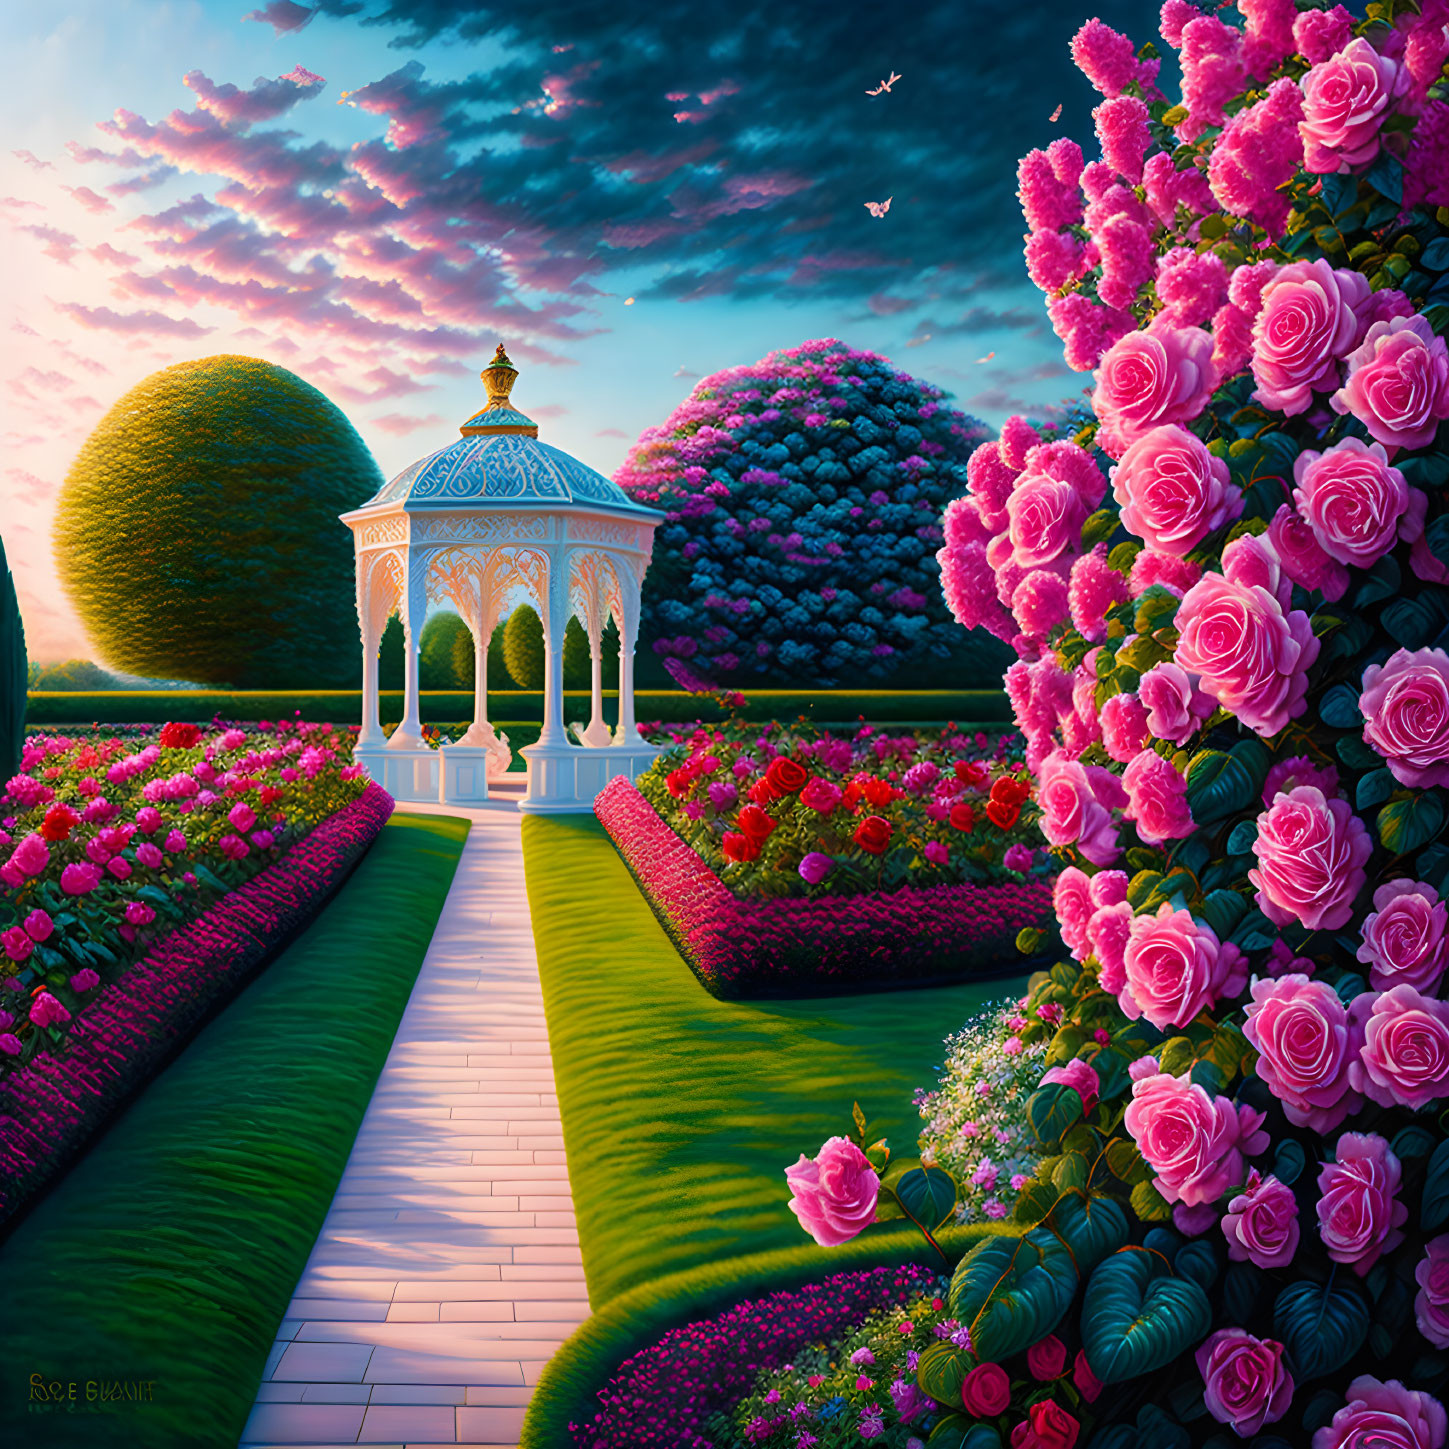 Colorful garden with white gazebo, pink and purple flowers, hedges, pathway, sunset sky